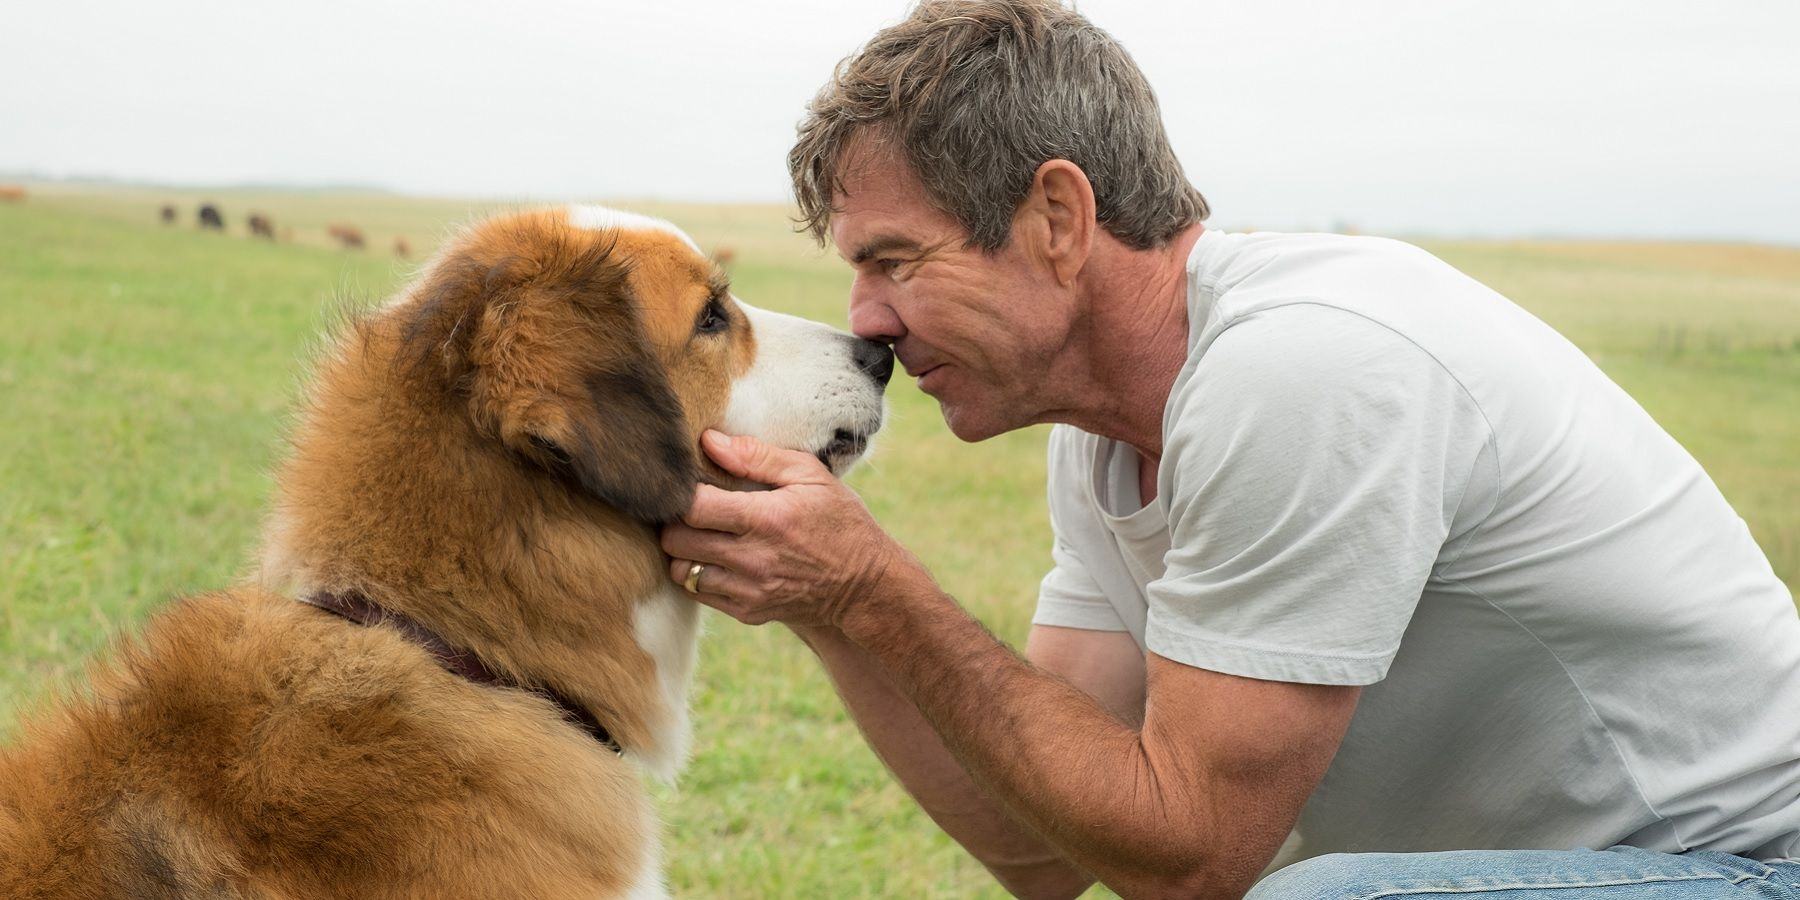 Ethan caresses a dog in A Dog's Purpose